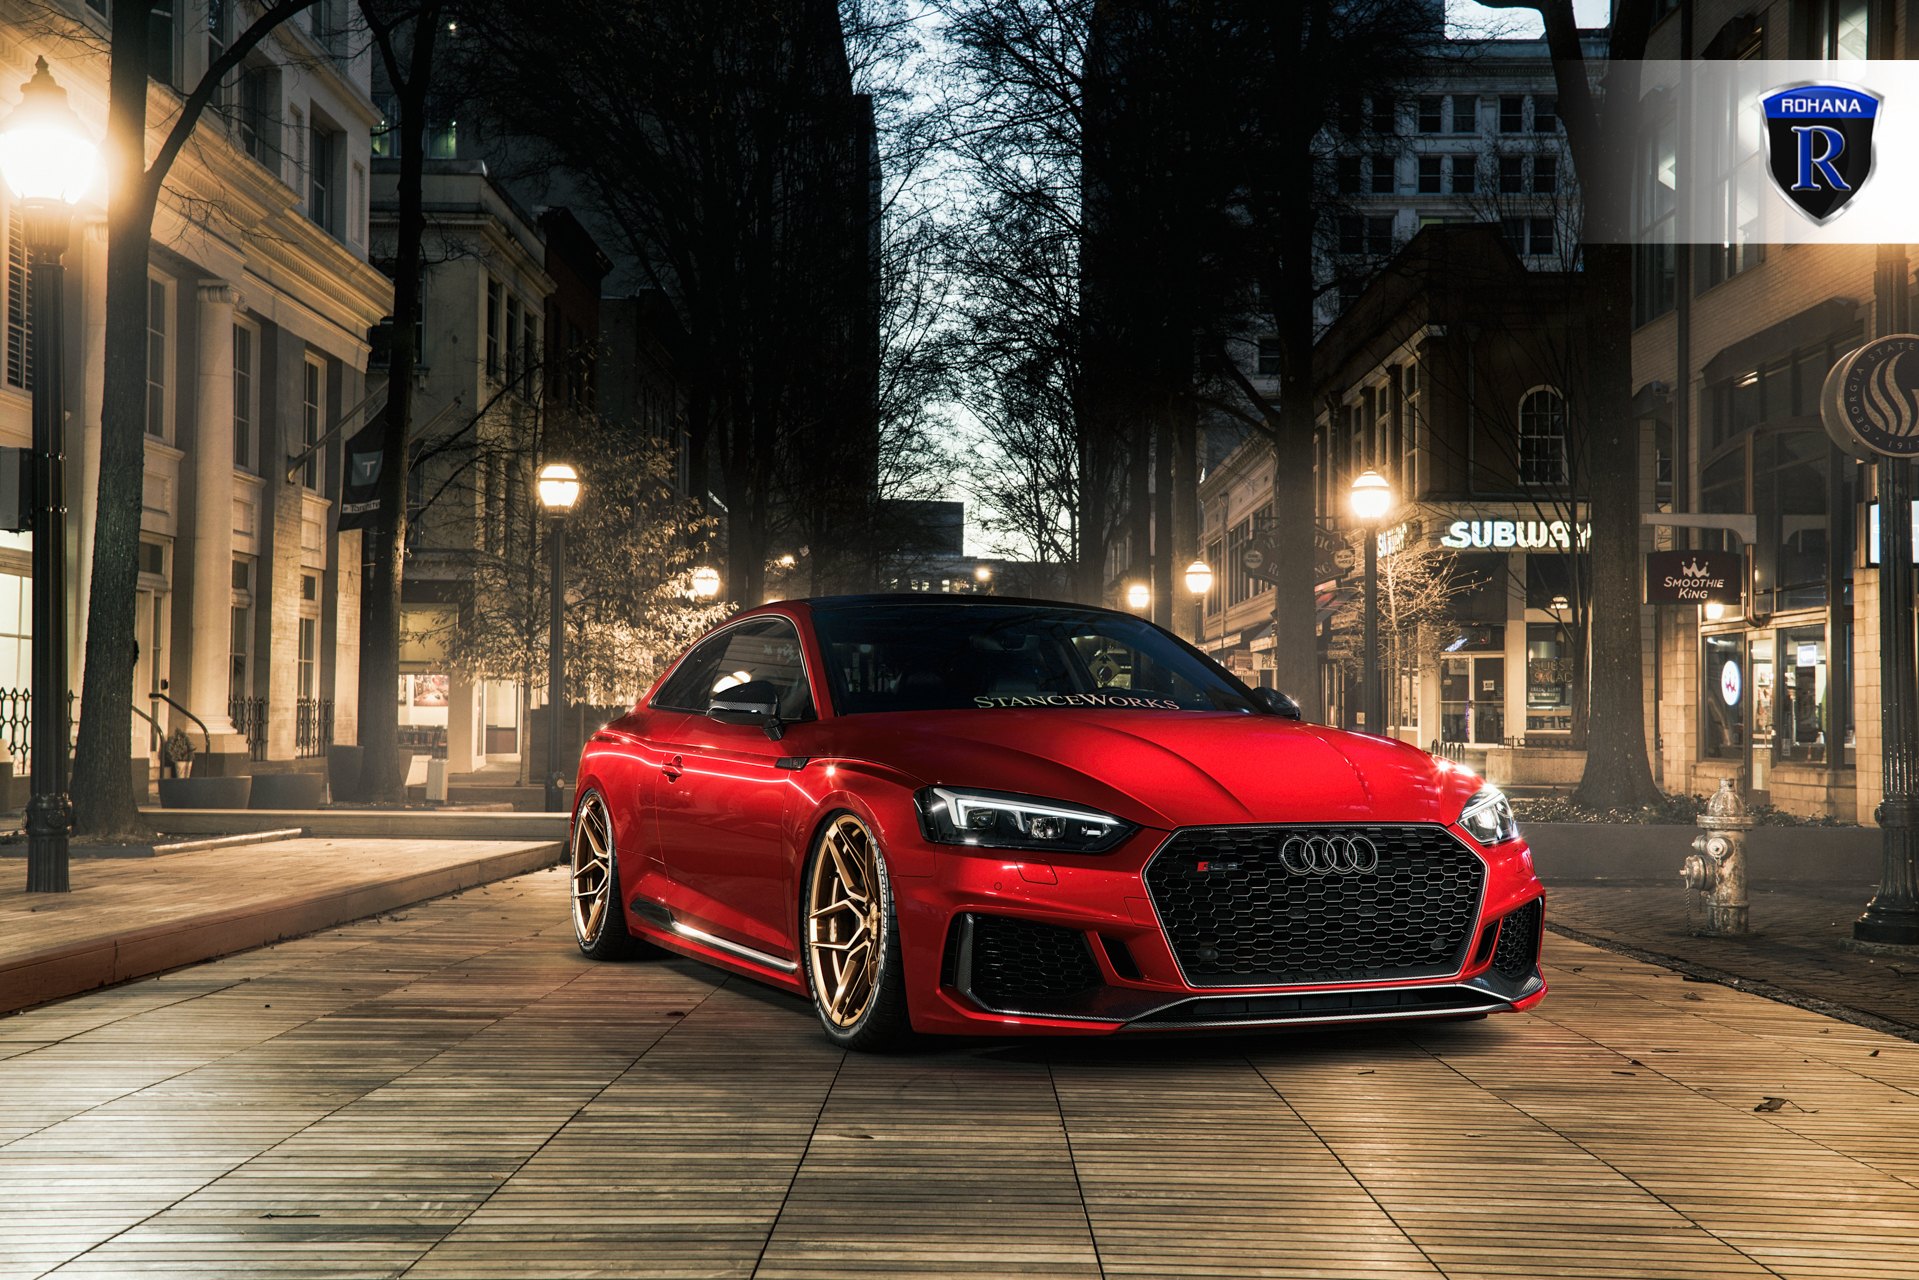 Red Audi S5 with Blacked Out Mesh Grille - Photo by Rohana Wheels